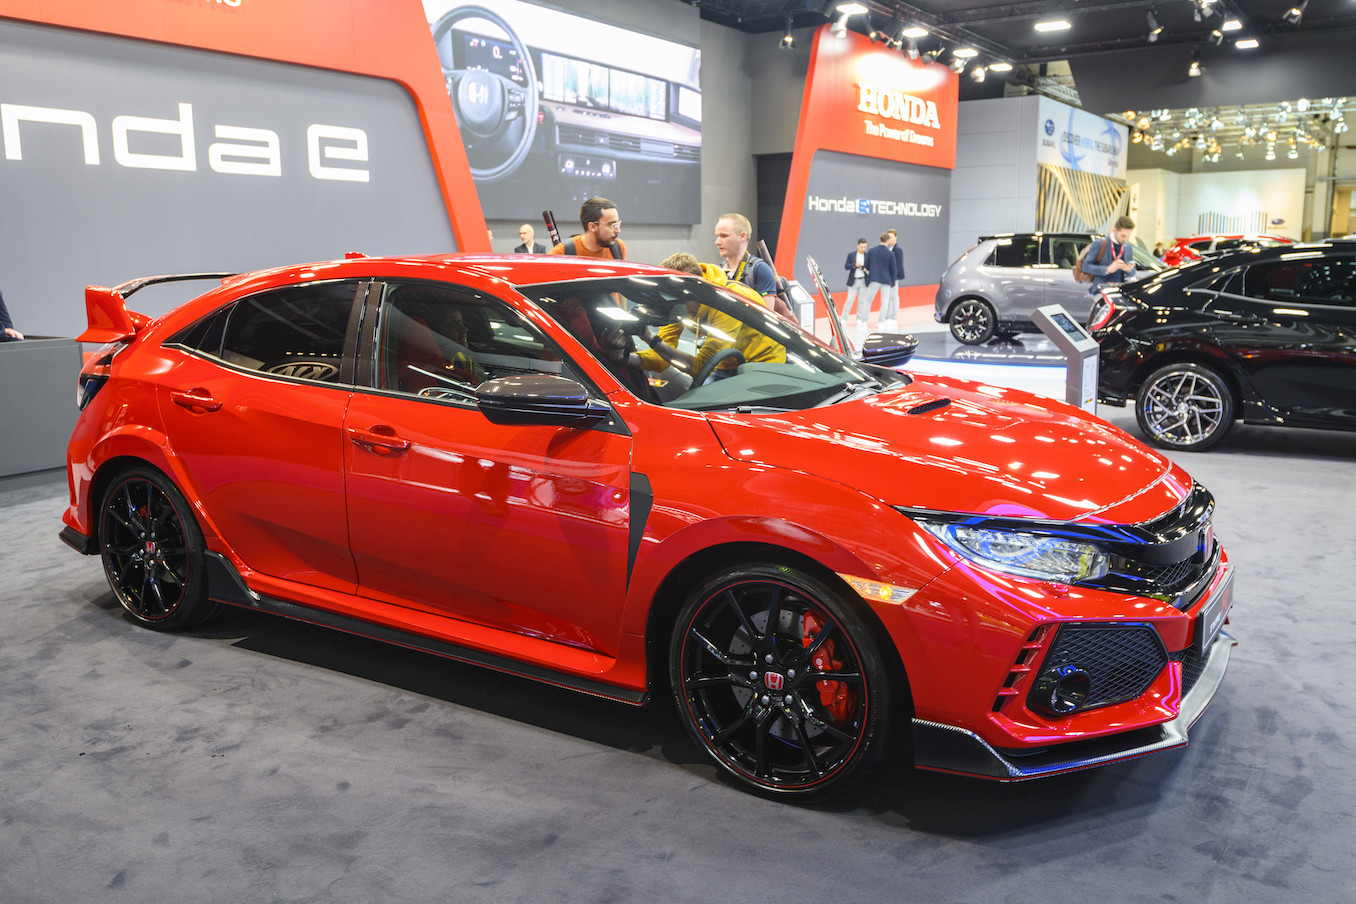 The 2020 Honda Civic Type R Gives You Ridiculous Power at Great Value